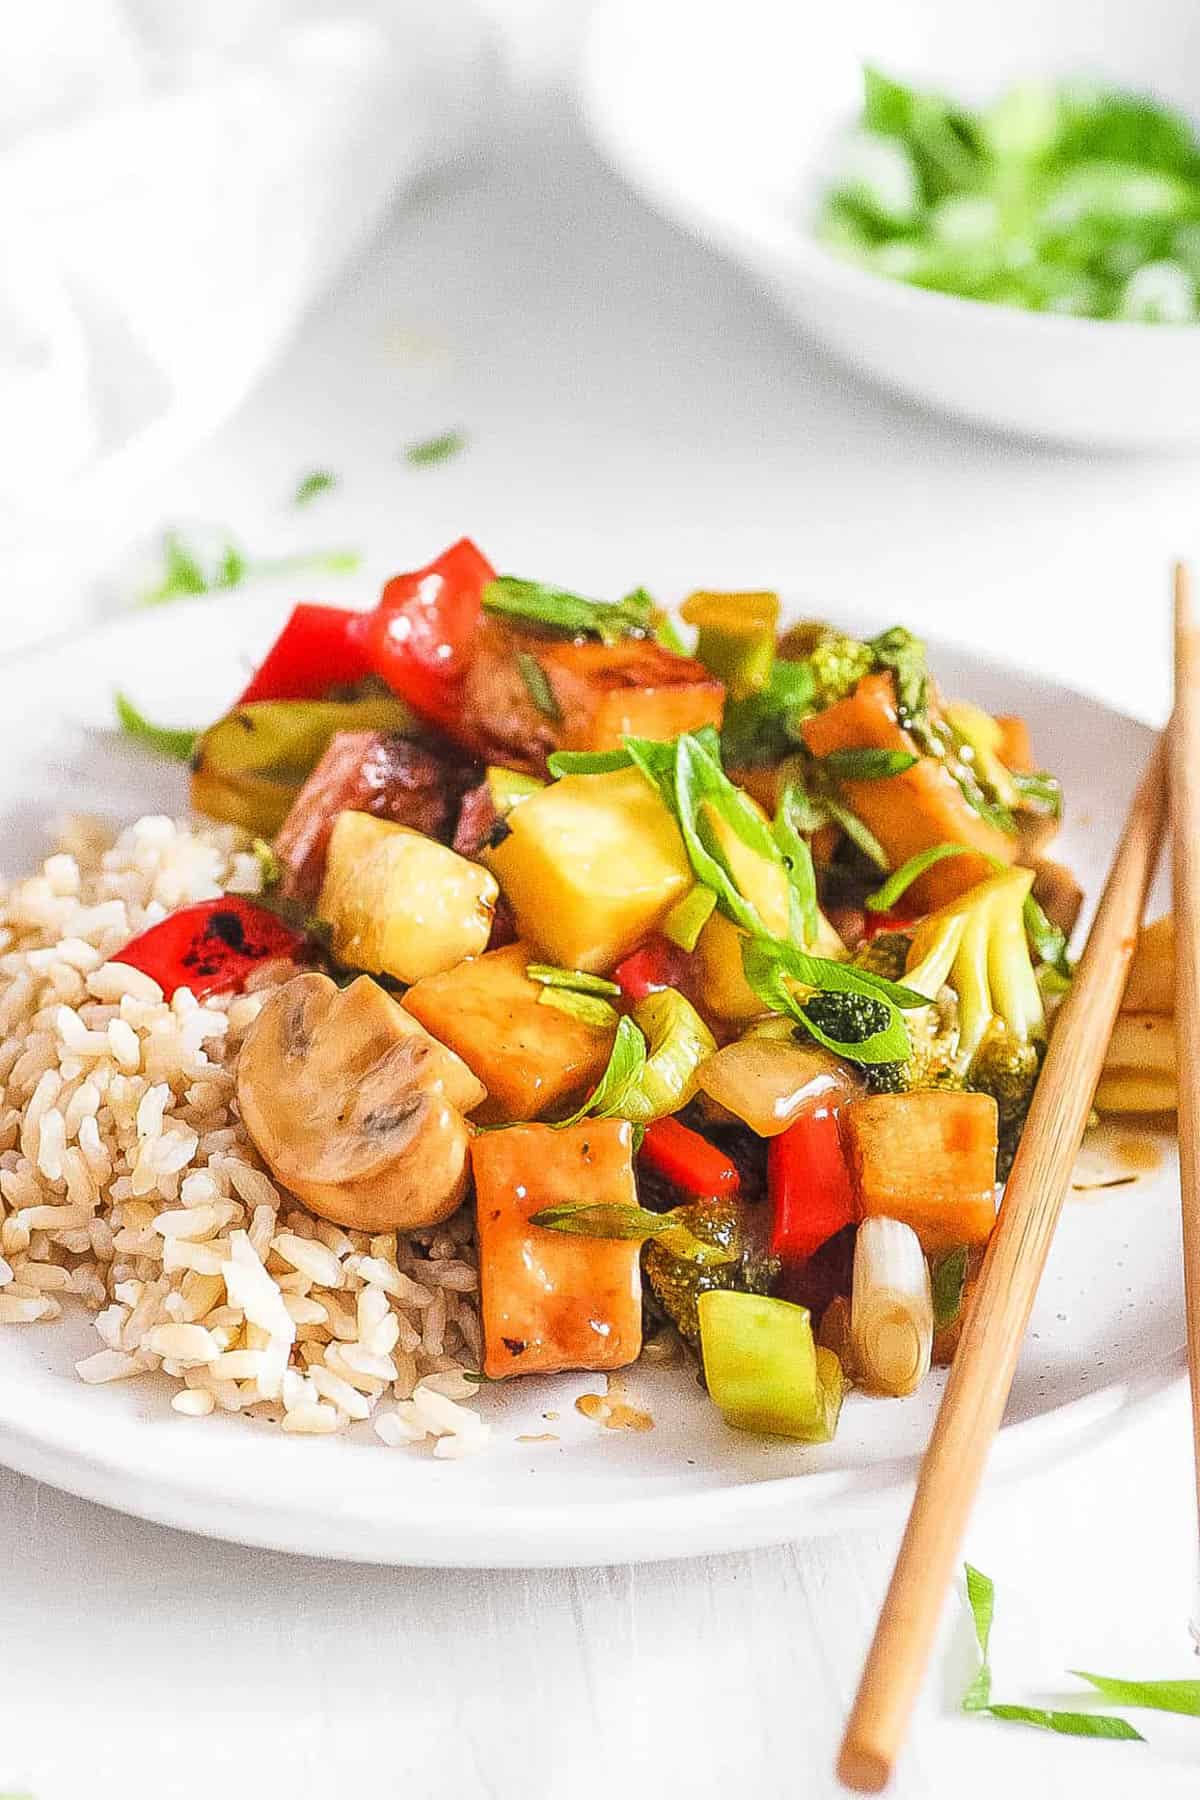 Sweet and sour tofu with veggies, served on a white plate with c،psticks.